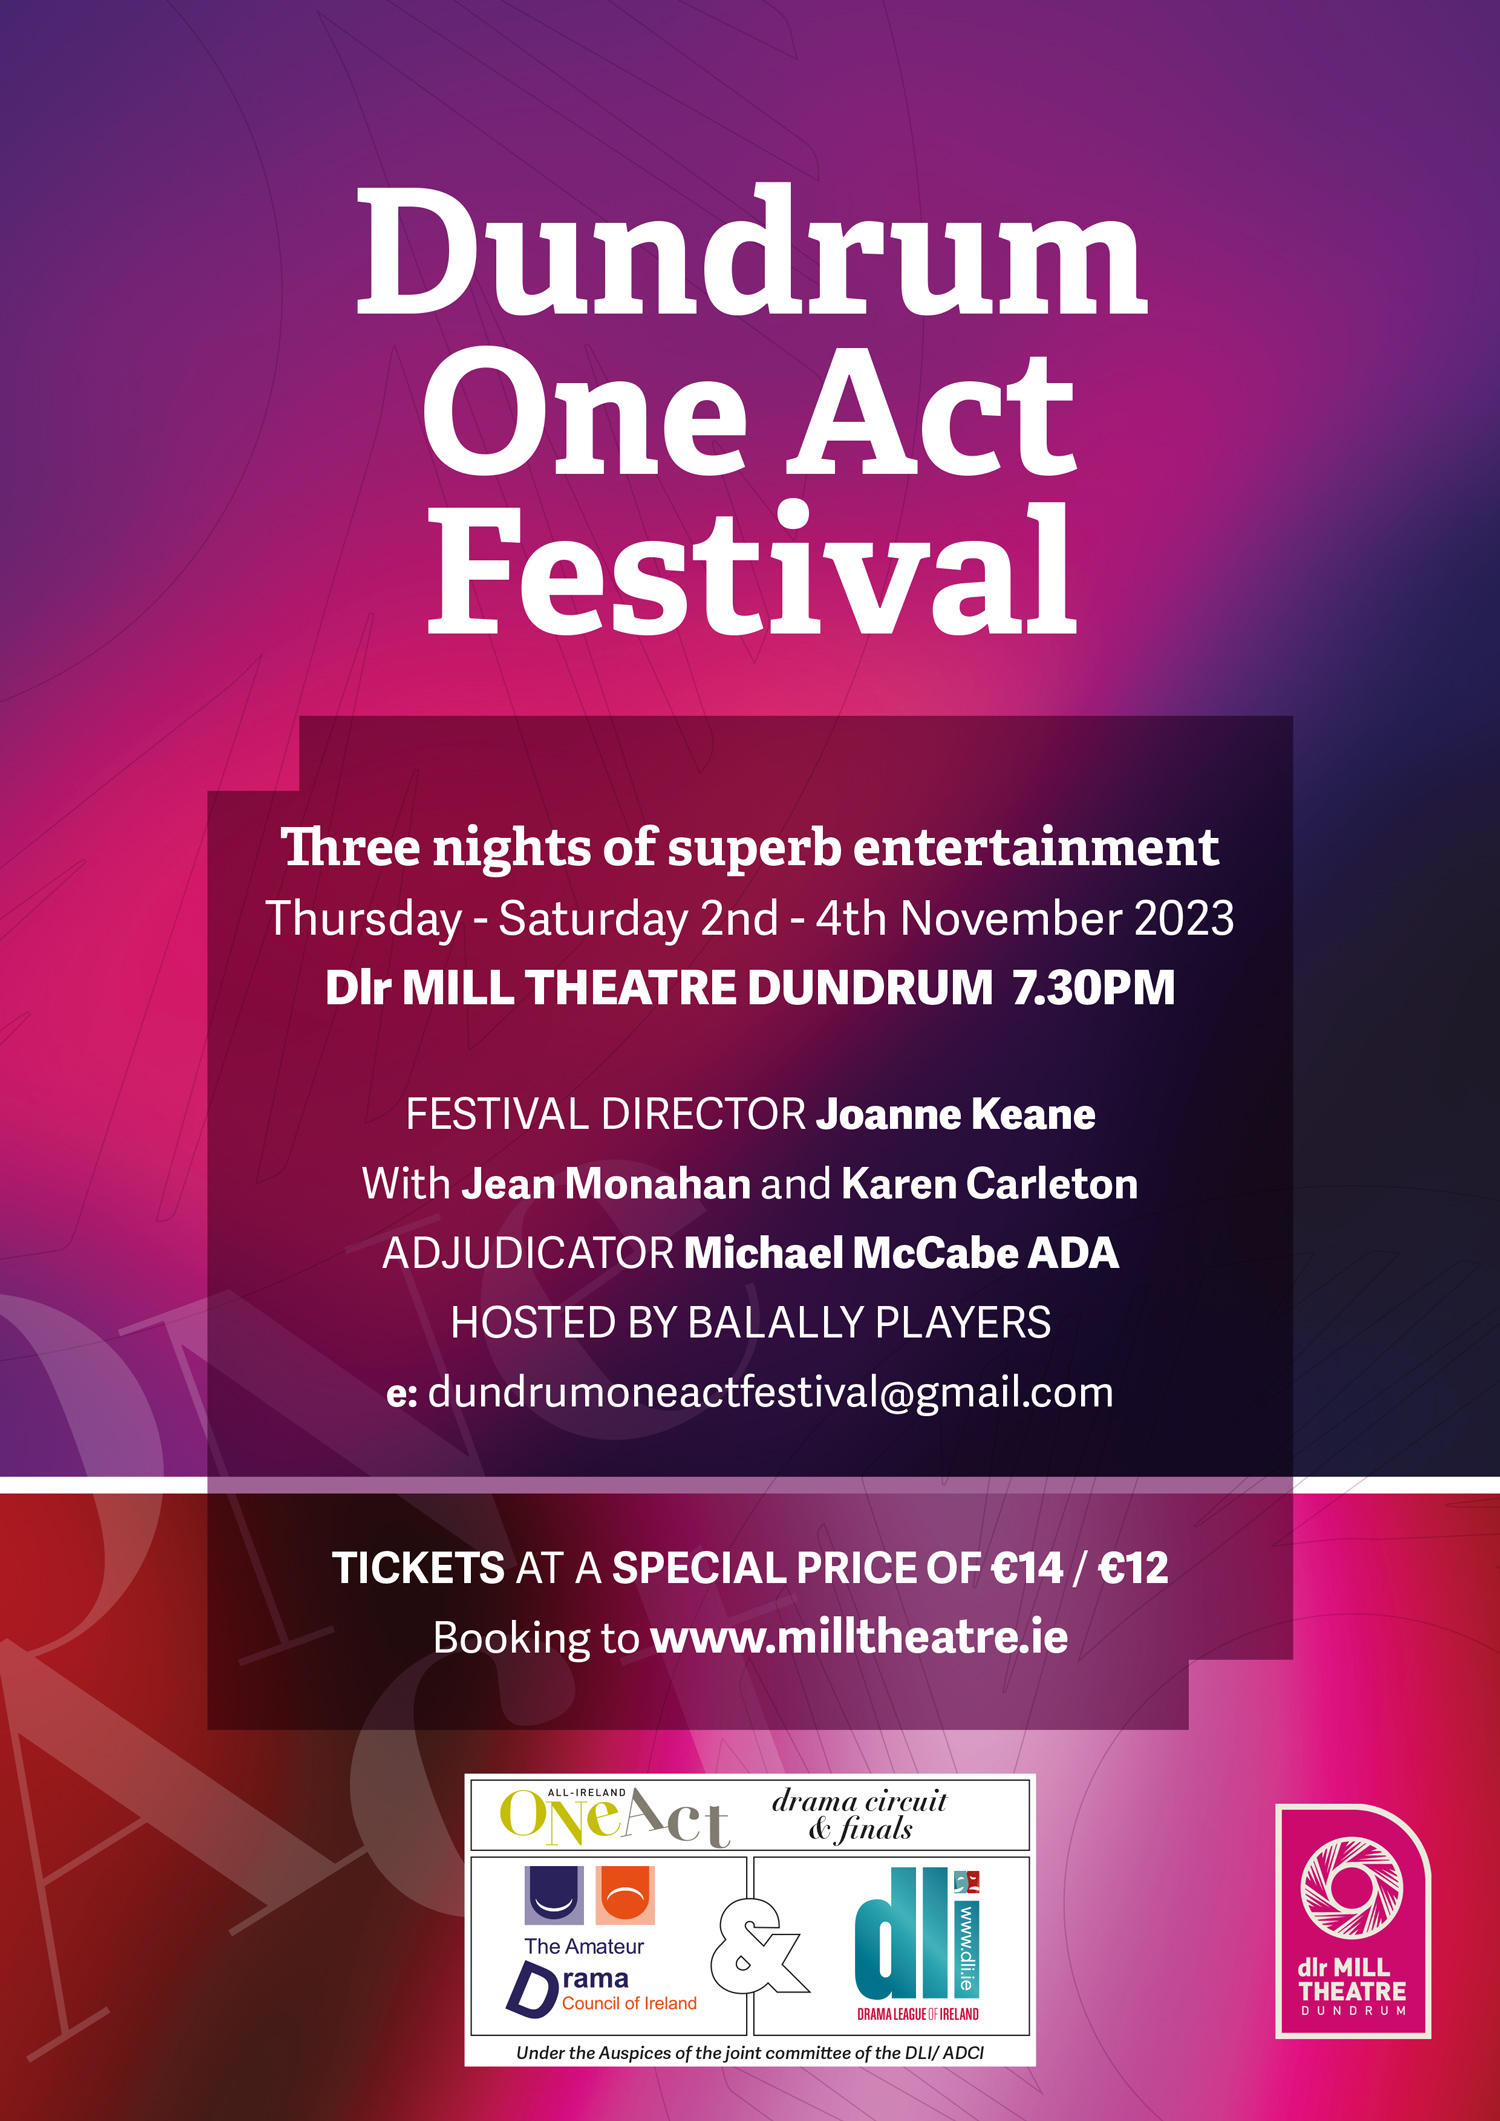 DUNDRUM ONE ACT FESTIVAL